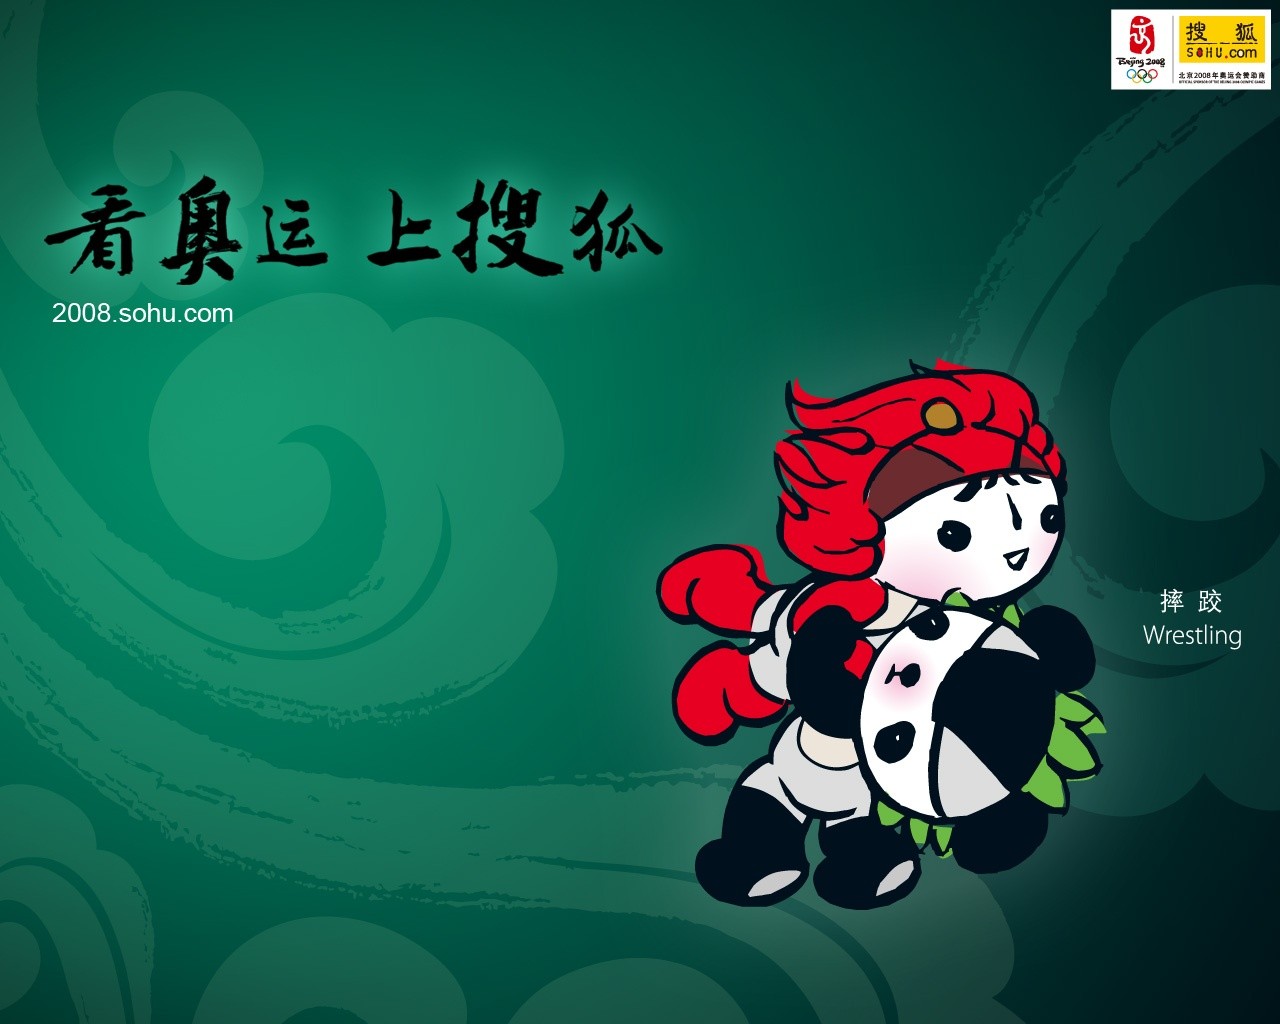 08 Olympic Games Fuwa Wallpapers #21 - 1280x1024